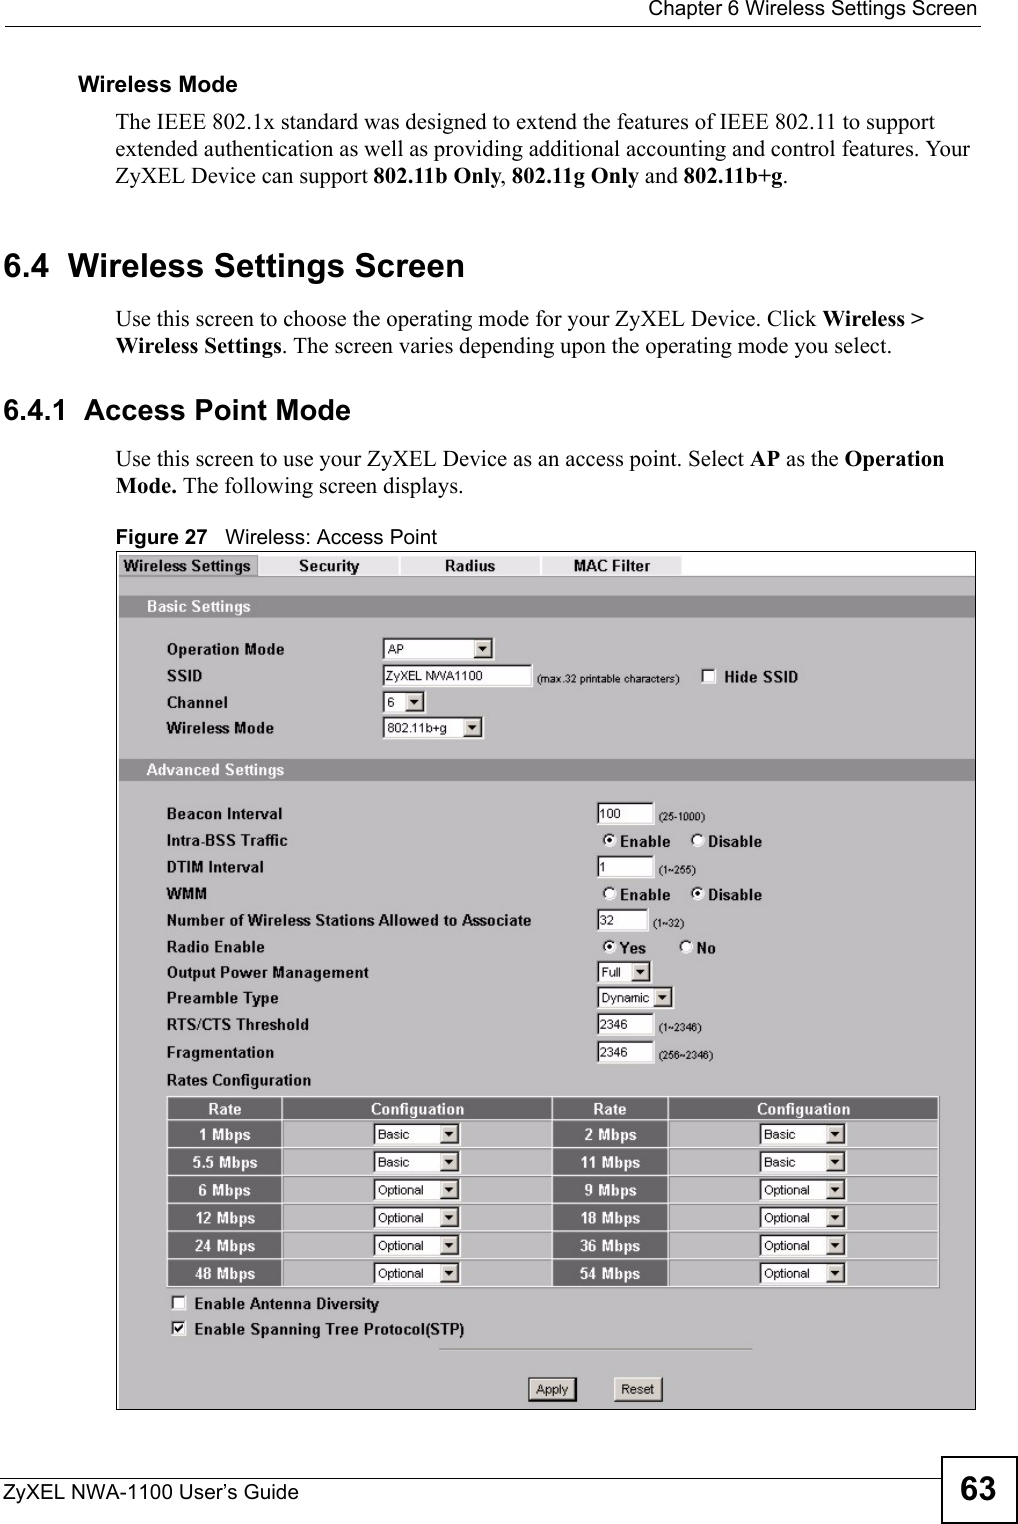  Chapter 6 Wireless Settings ScreenZyXEL NWA-1100 User’s Guide 63Wireless ModeThe IEEE 802.1x standard was designed to extend the features of IEEE 802.11 to support extended authentication as well as providing additional accounting and control features. Your ZyXEL Device can support 802.11b Only, 802.11g Only and 802.11b+g.6.4  Wireless Settings ScreenUse this screen to choose the operating mode for your ZyXEL Device. Click Wireless &gt; Wireless Settings. The screen varies depending upon the operating mode you select.6.4.1  Access Point ModeUse this screen to use your ZyXEL Device as an access point. Select AP as the Operation Mode. The following screen displays.Figure 27   Wireless: Access Point